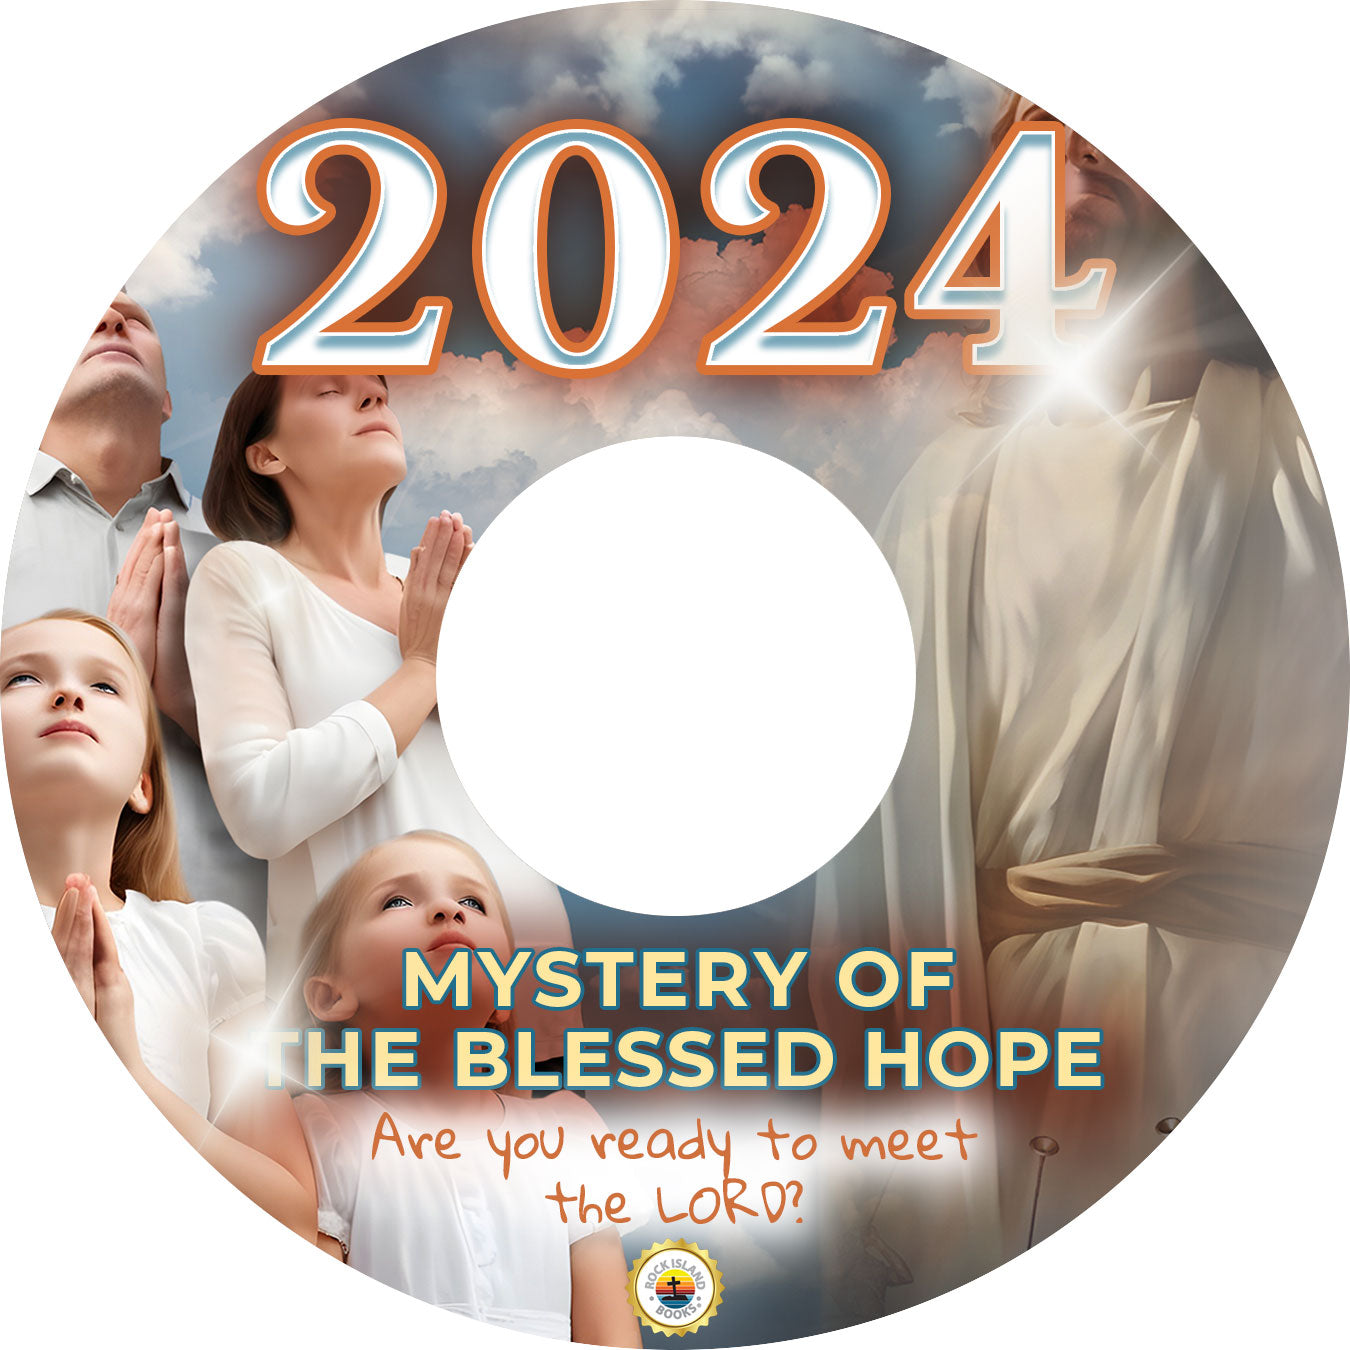 2024: Mystery of the Blessed Hope DVD